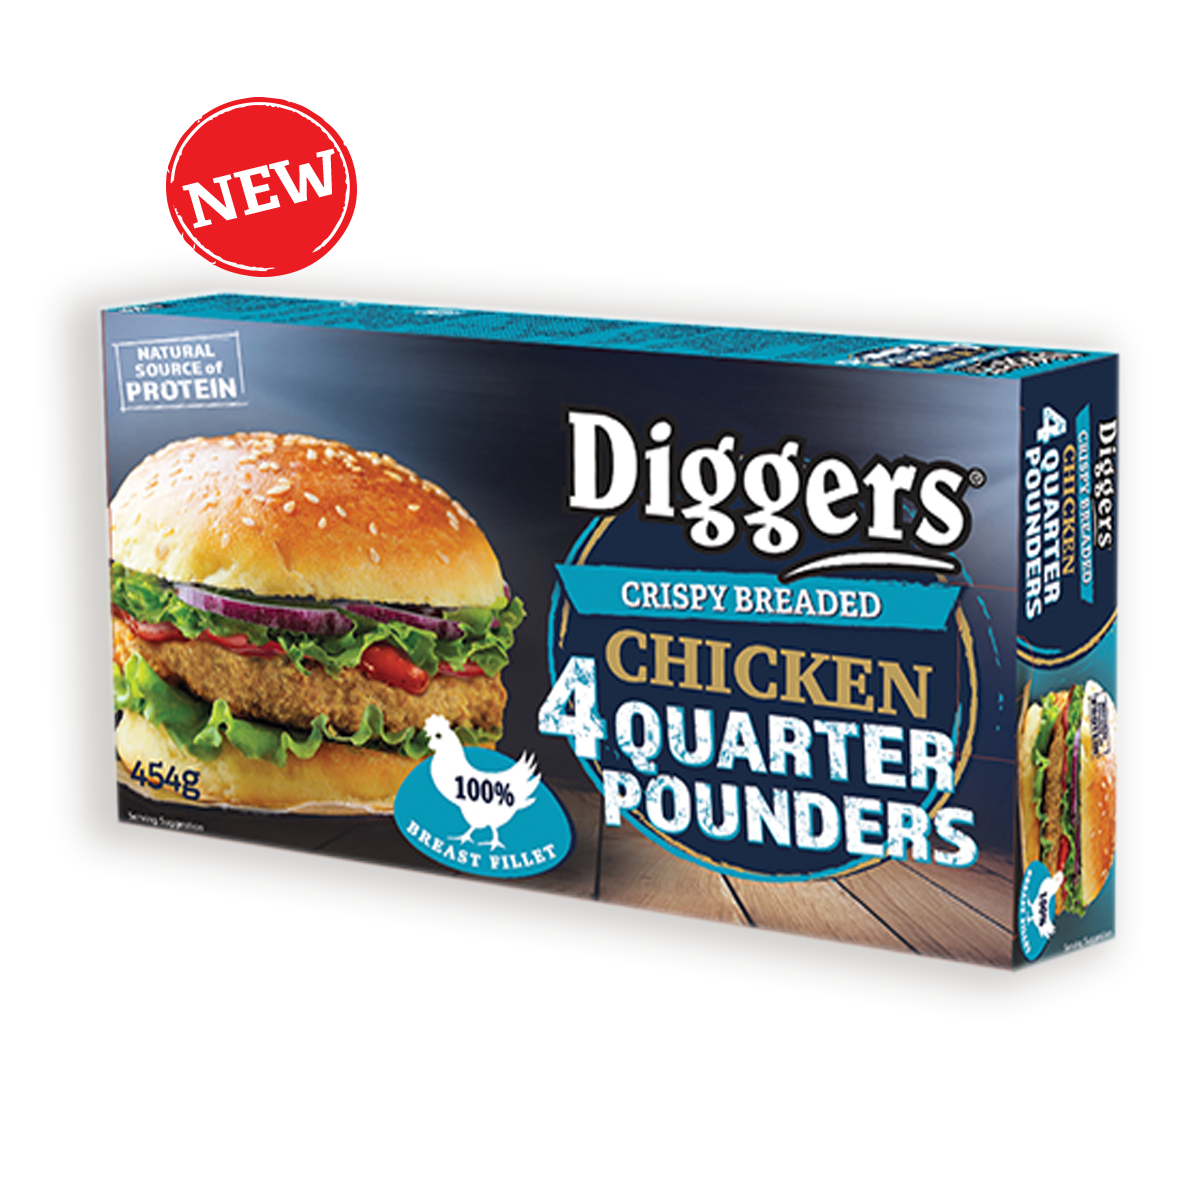 Diggers Crispy Breaded Chicken Quarter Pounders Burgers